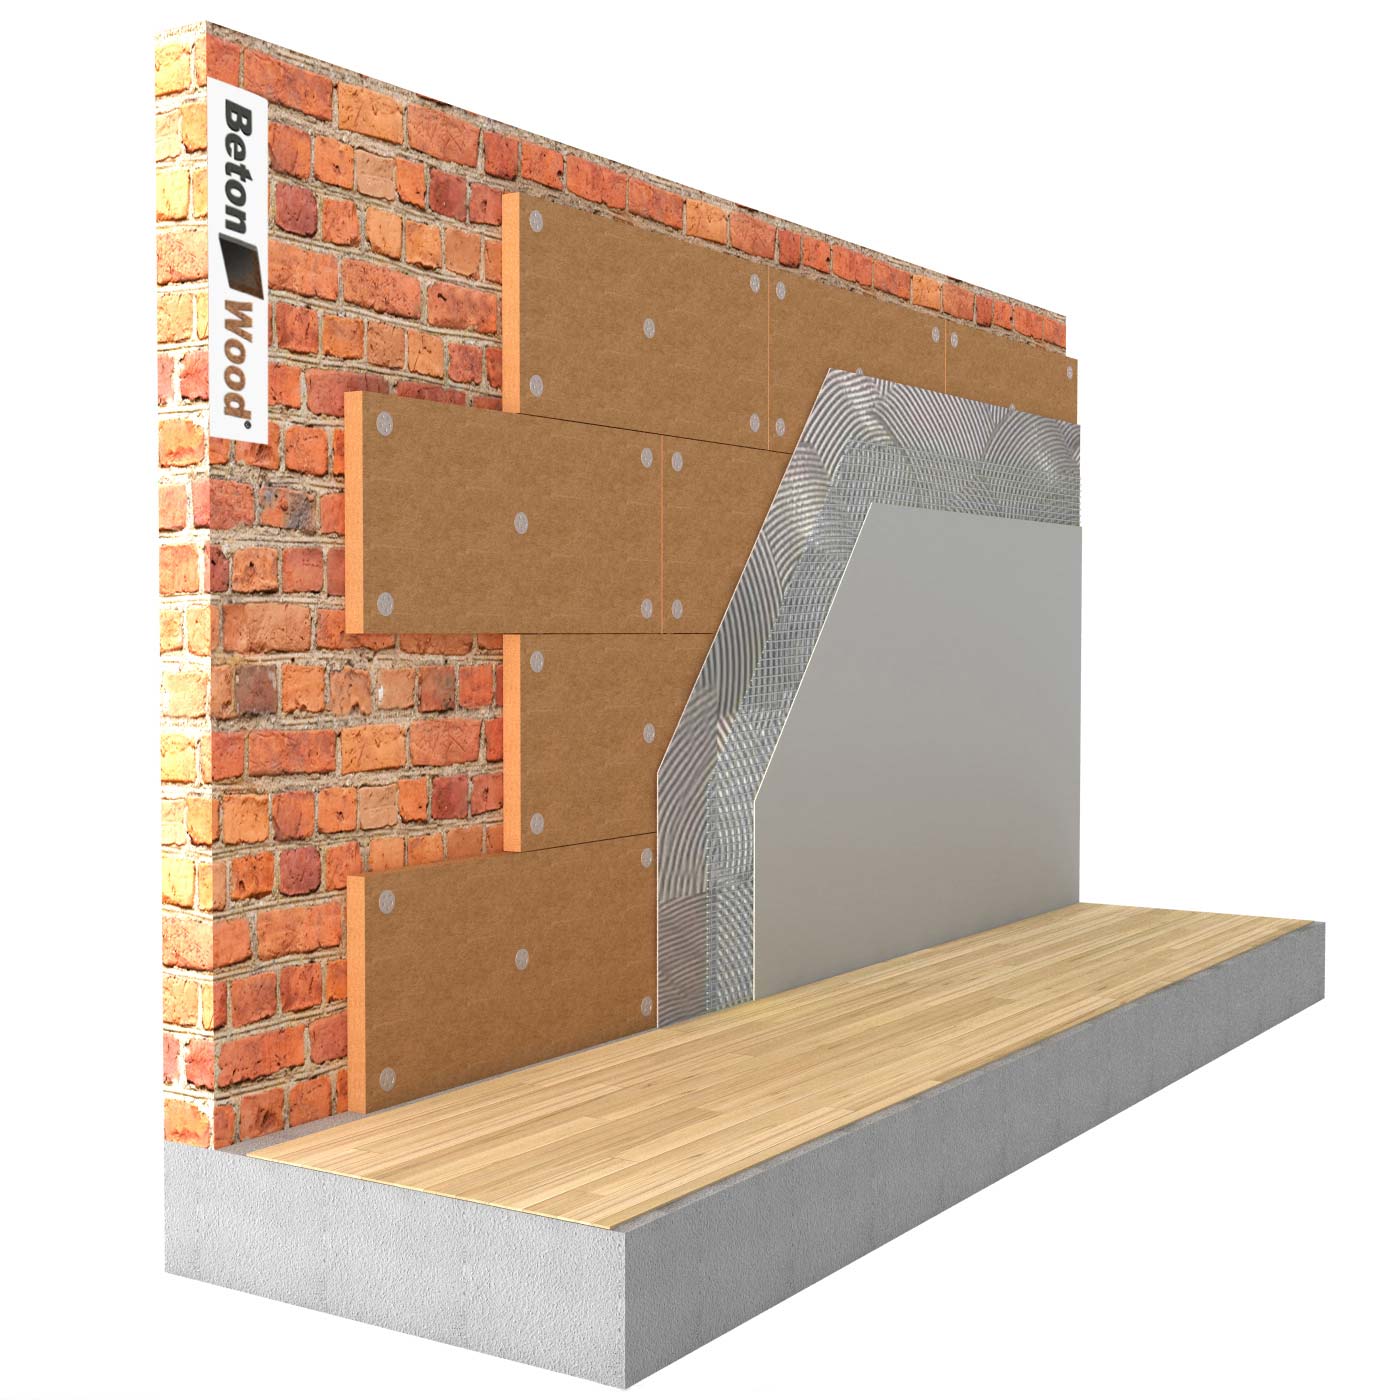 Internal thermal insulation system in Protect dry Wood fiber